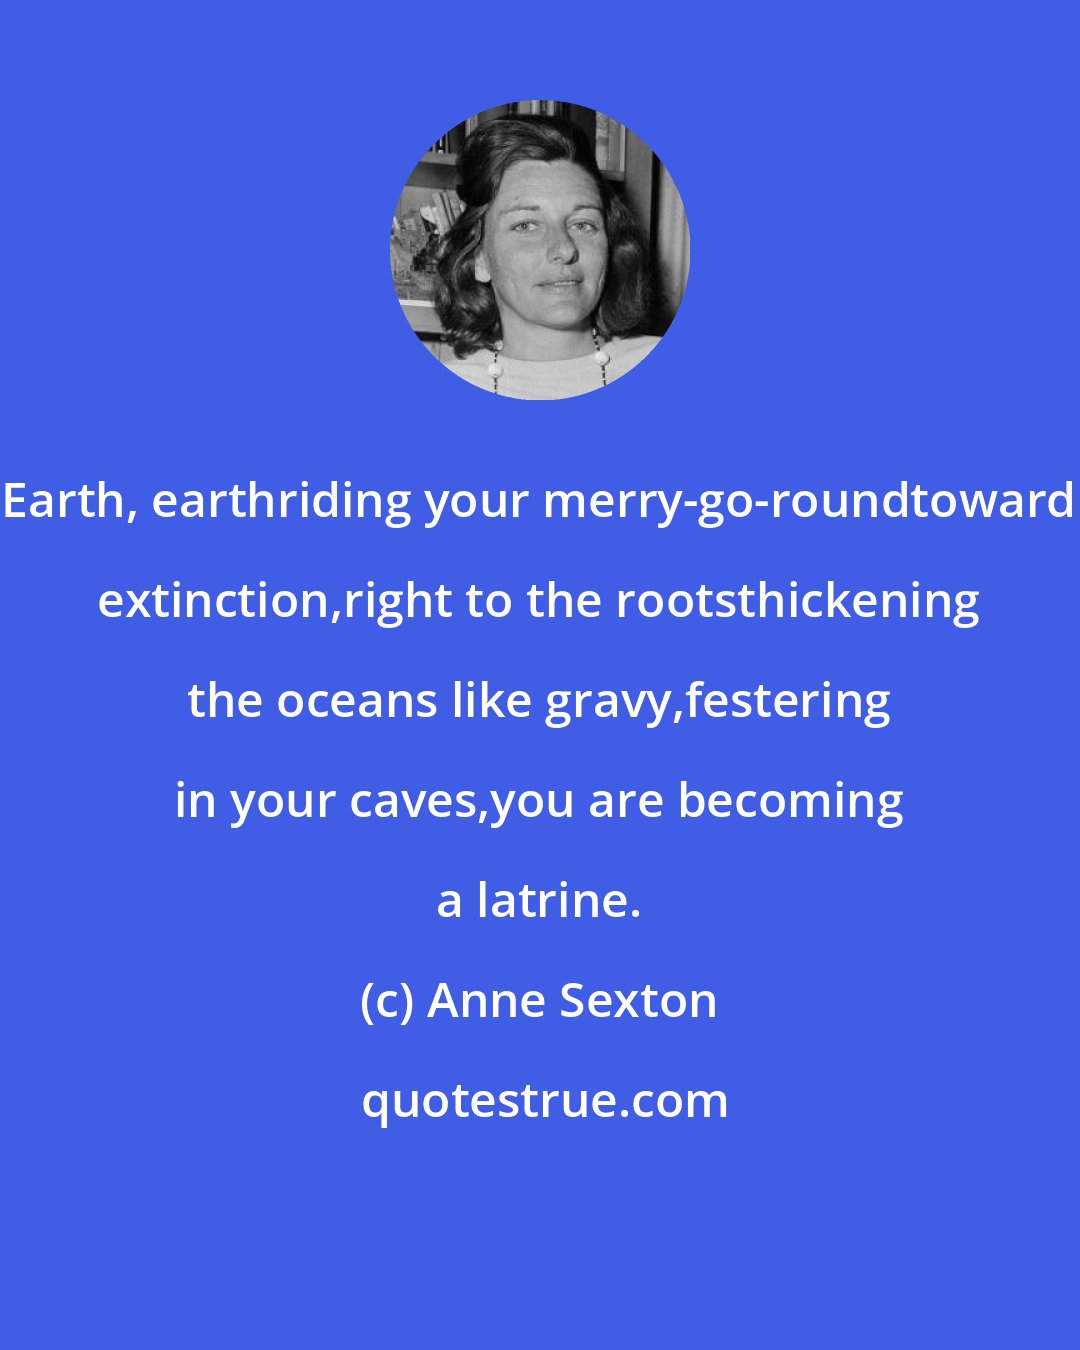 Anne Sexton: Earth, earthriding your merry-go-roundtoward extinction,right to the rootsthickening the oceans like gravy,festering in your caves,you are becoming a latrine.